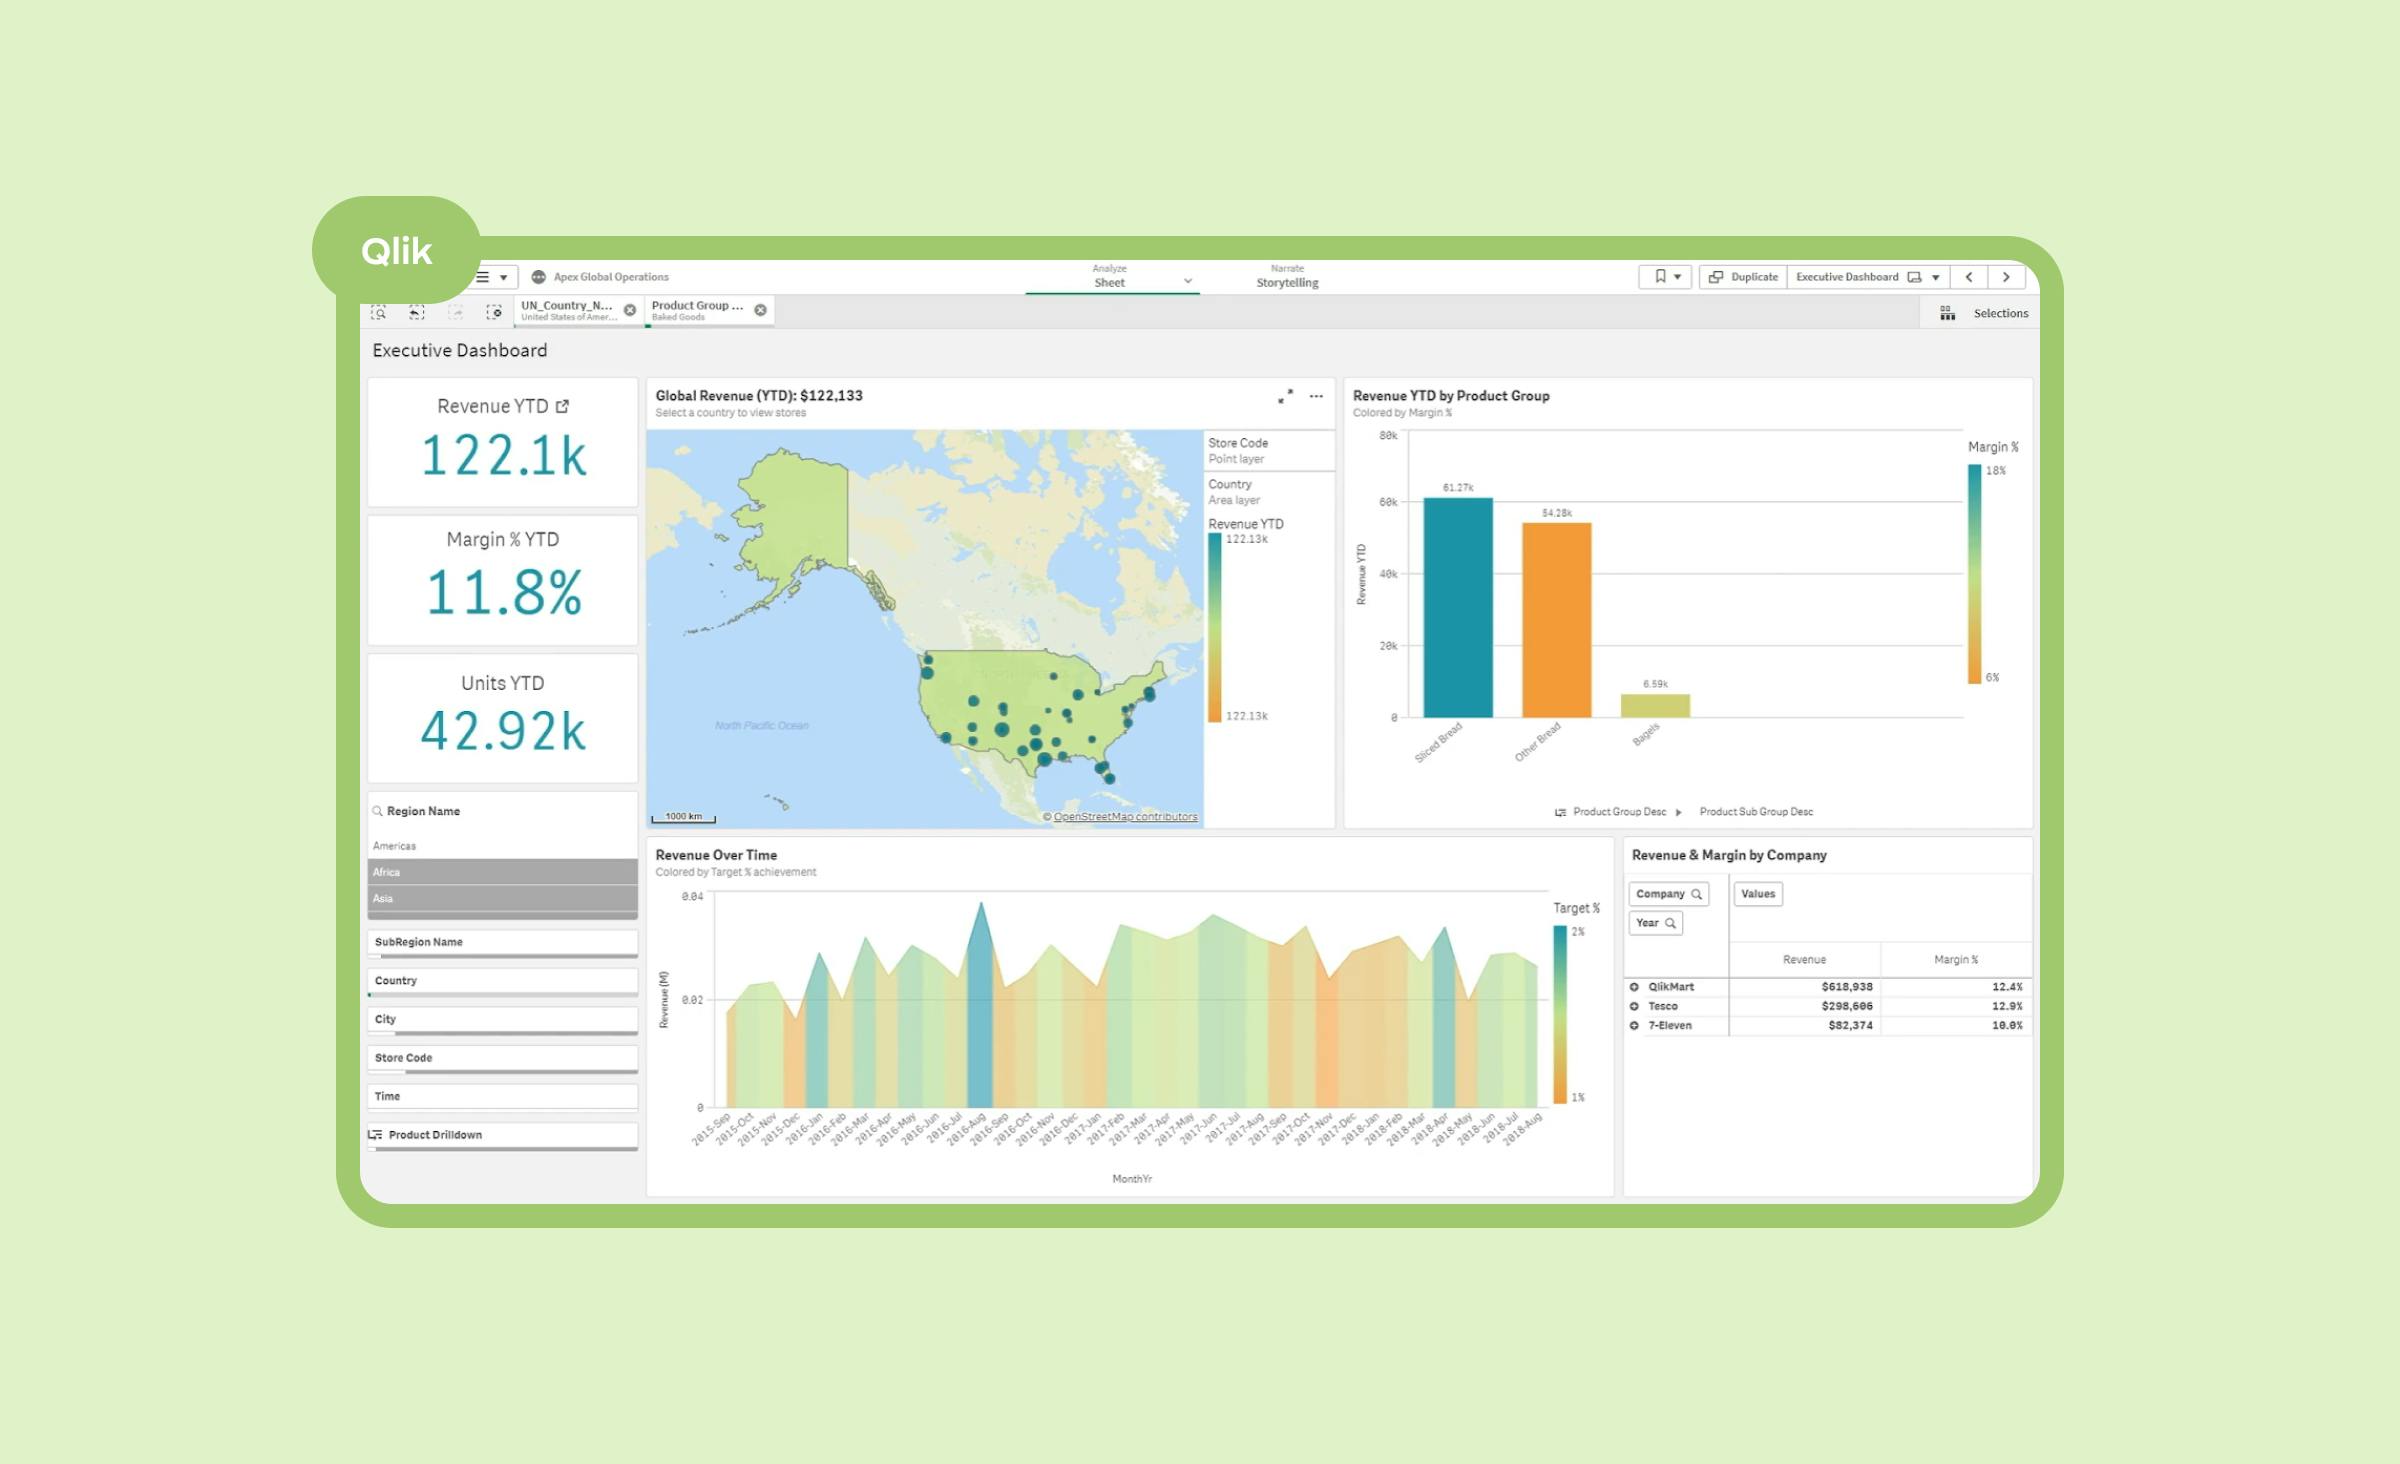 Qlik data visualization tool dashboard showcasing a global revenue analysis diagram, a bar chart, and a marked map illustrating revenue distribution across countries where the company has points of sale.